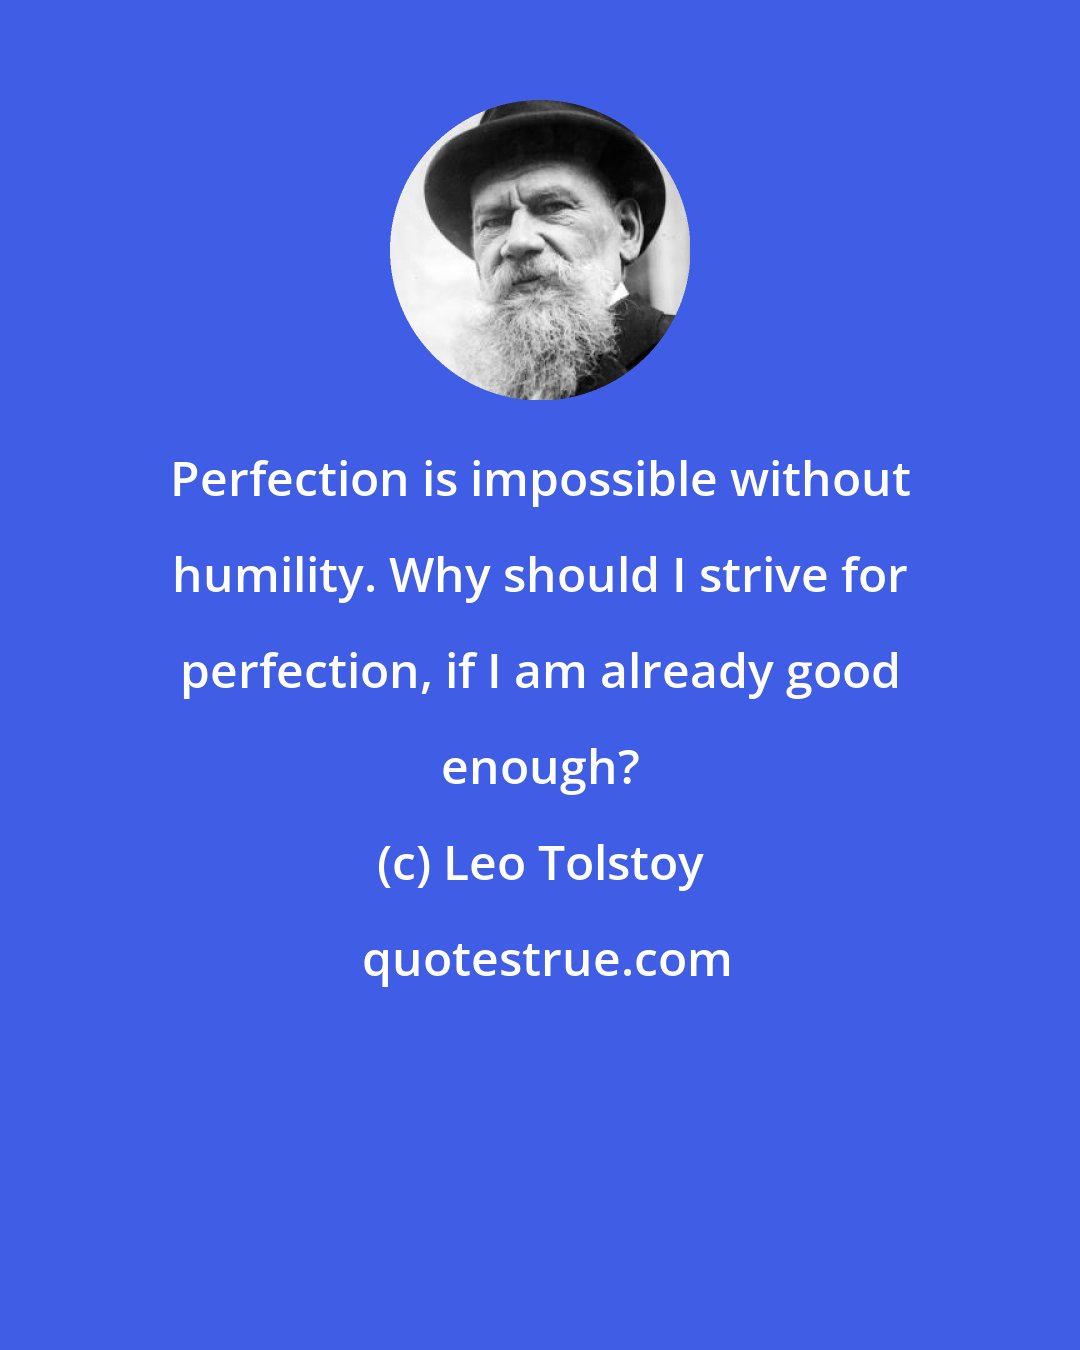 Leo Tolstoy: Perfection is impossible without humility. Why should I strive for perfection, if I am already good enough?